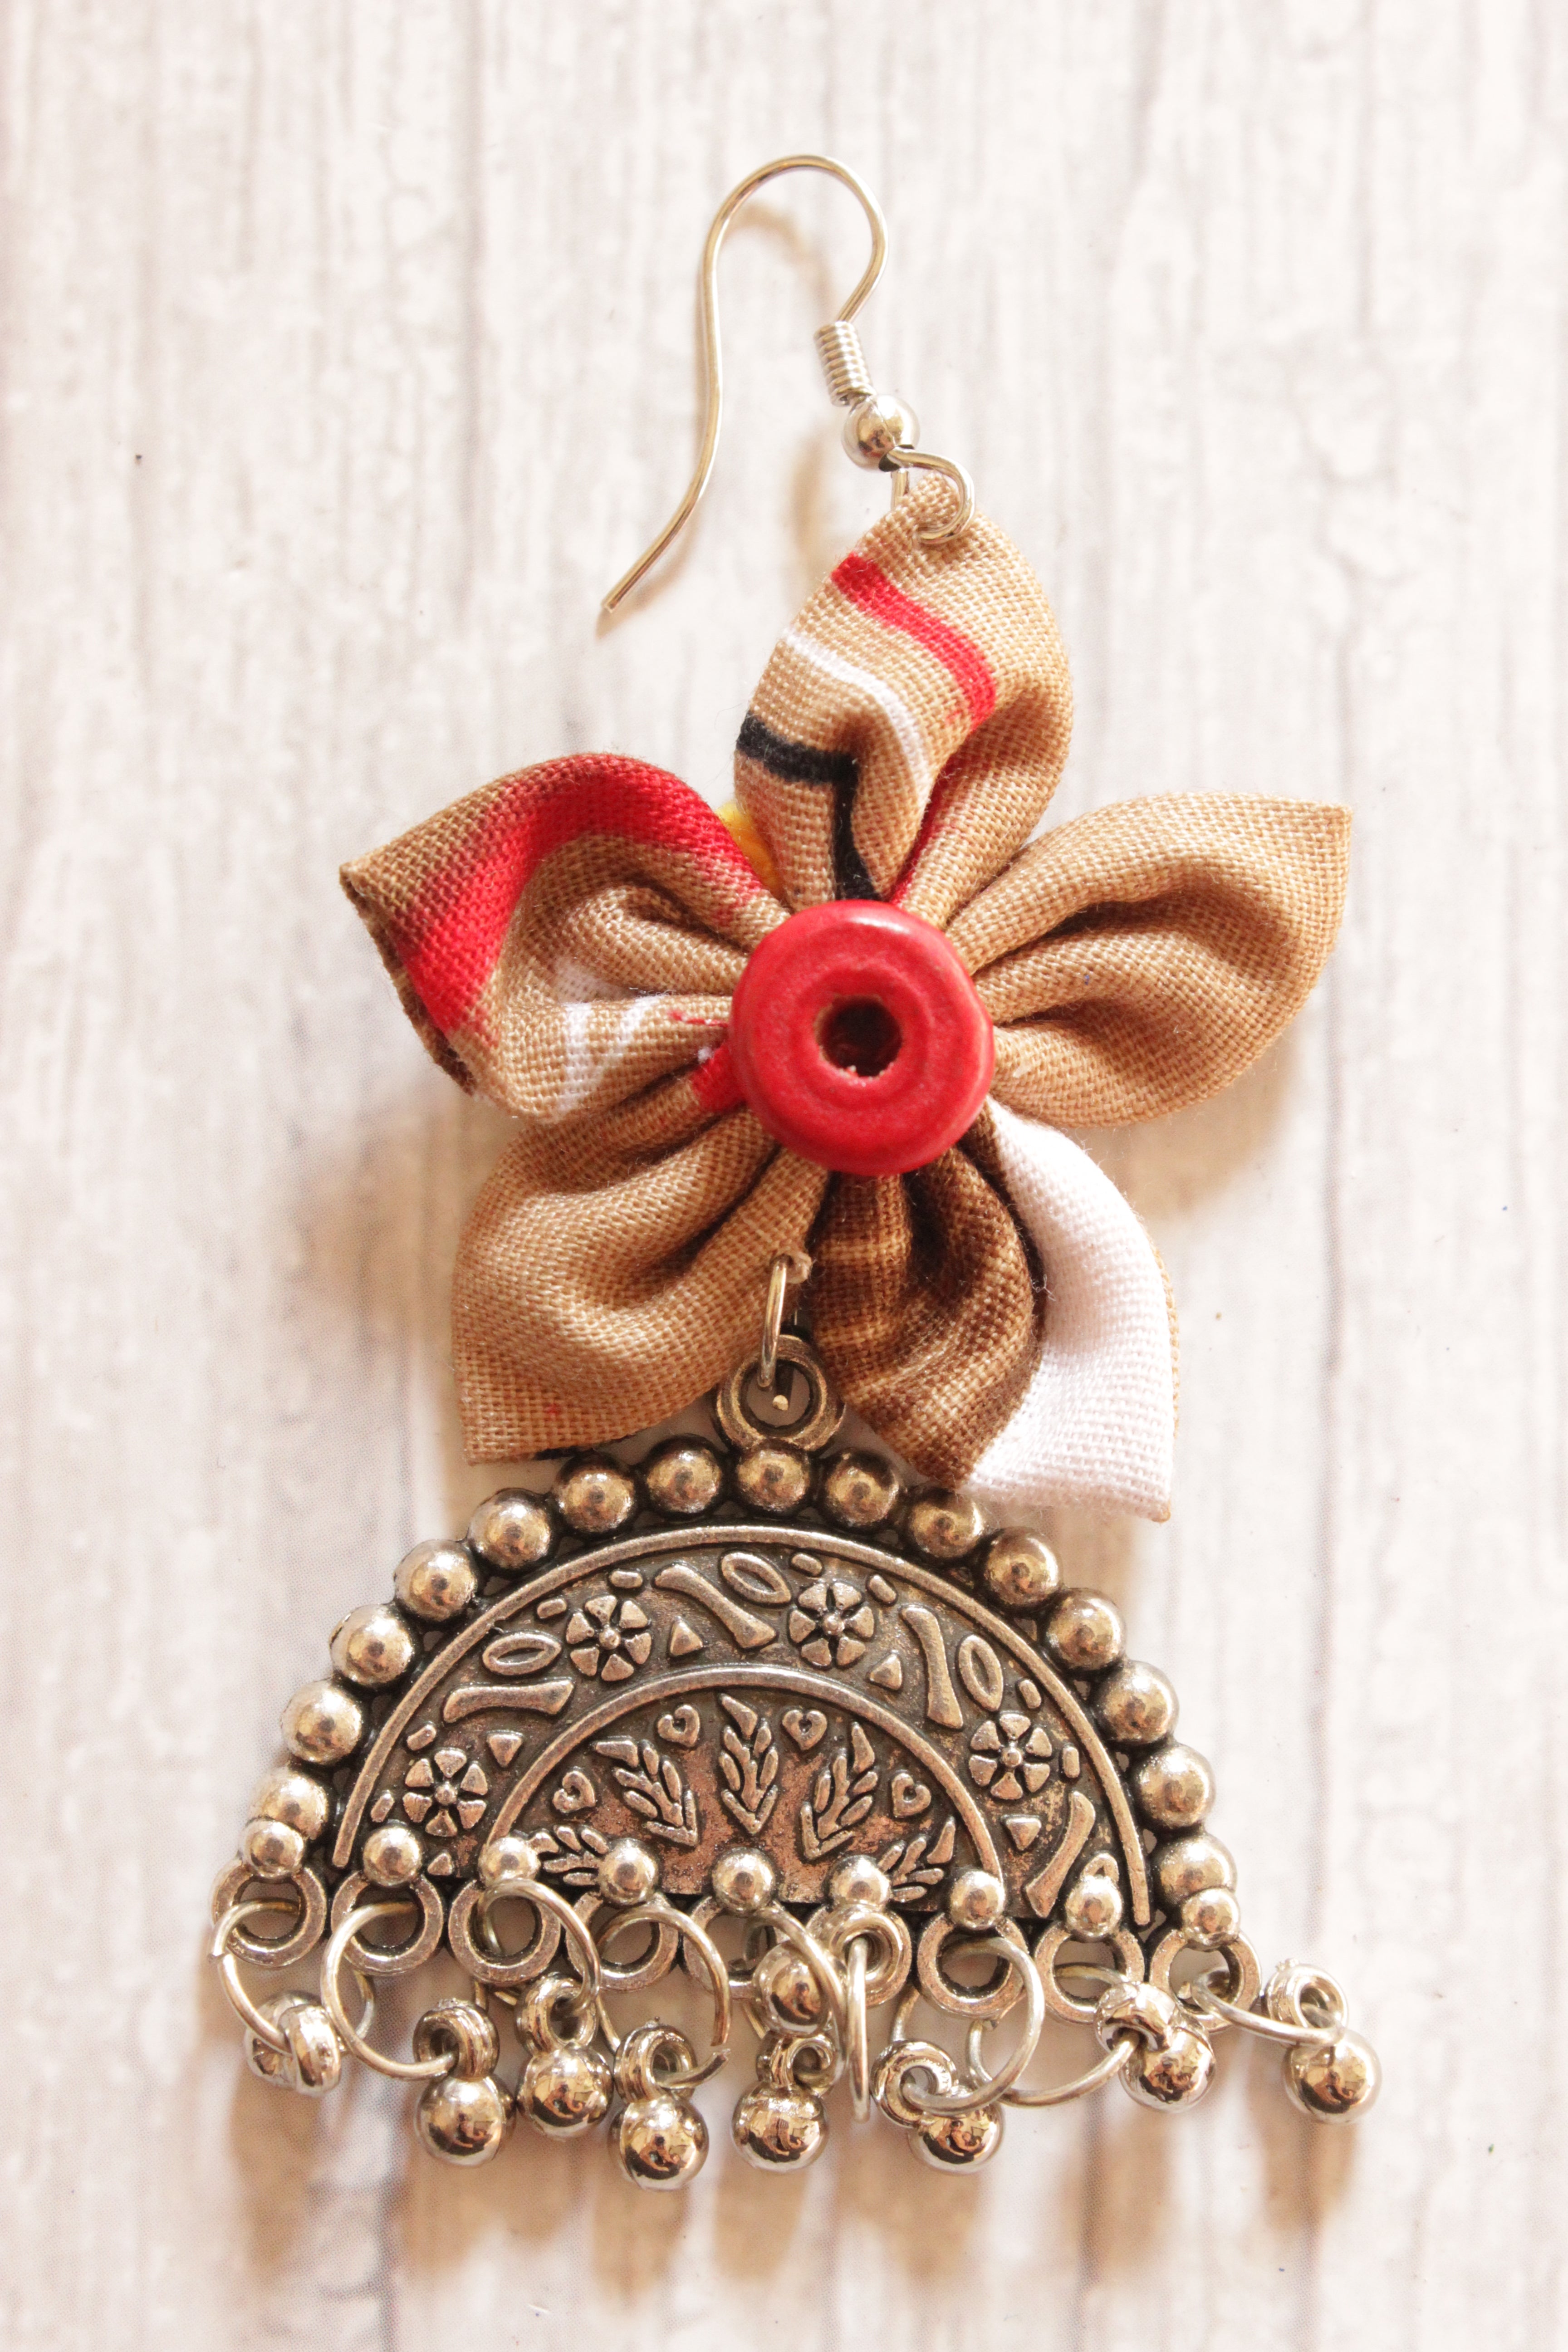 Brown & Red Handmade Fabric Flower Earrings with Dome Shaped Metal Accent